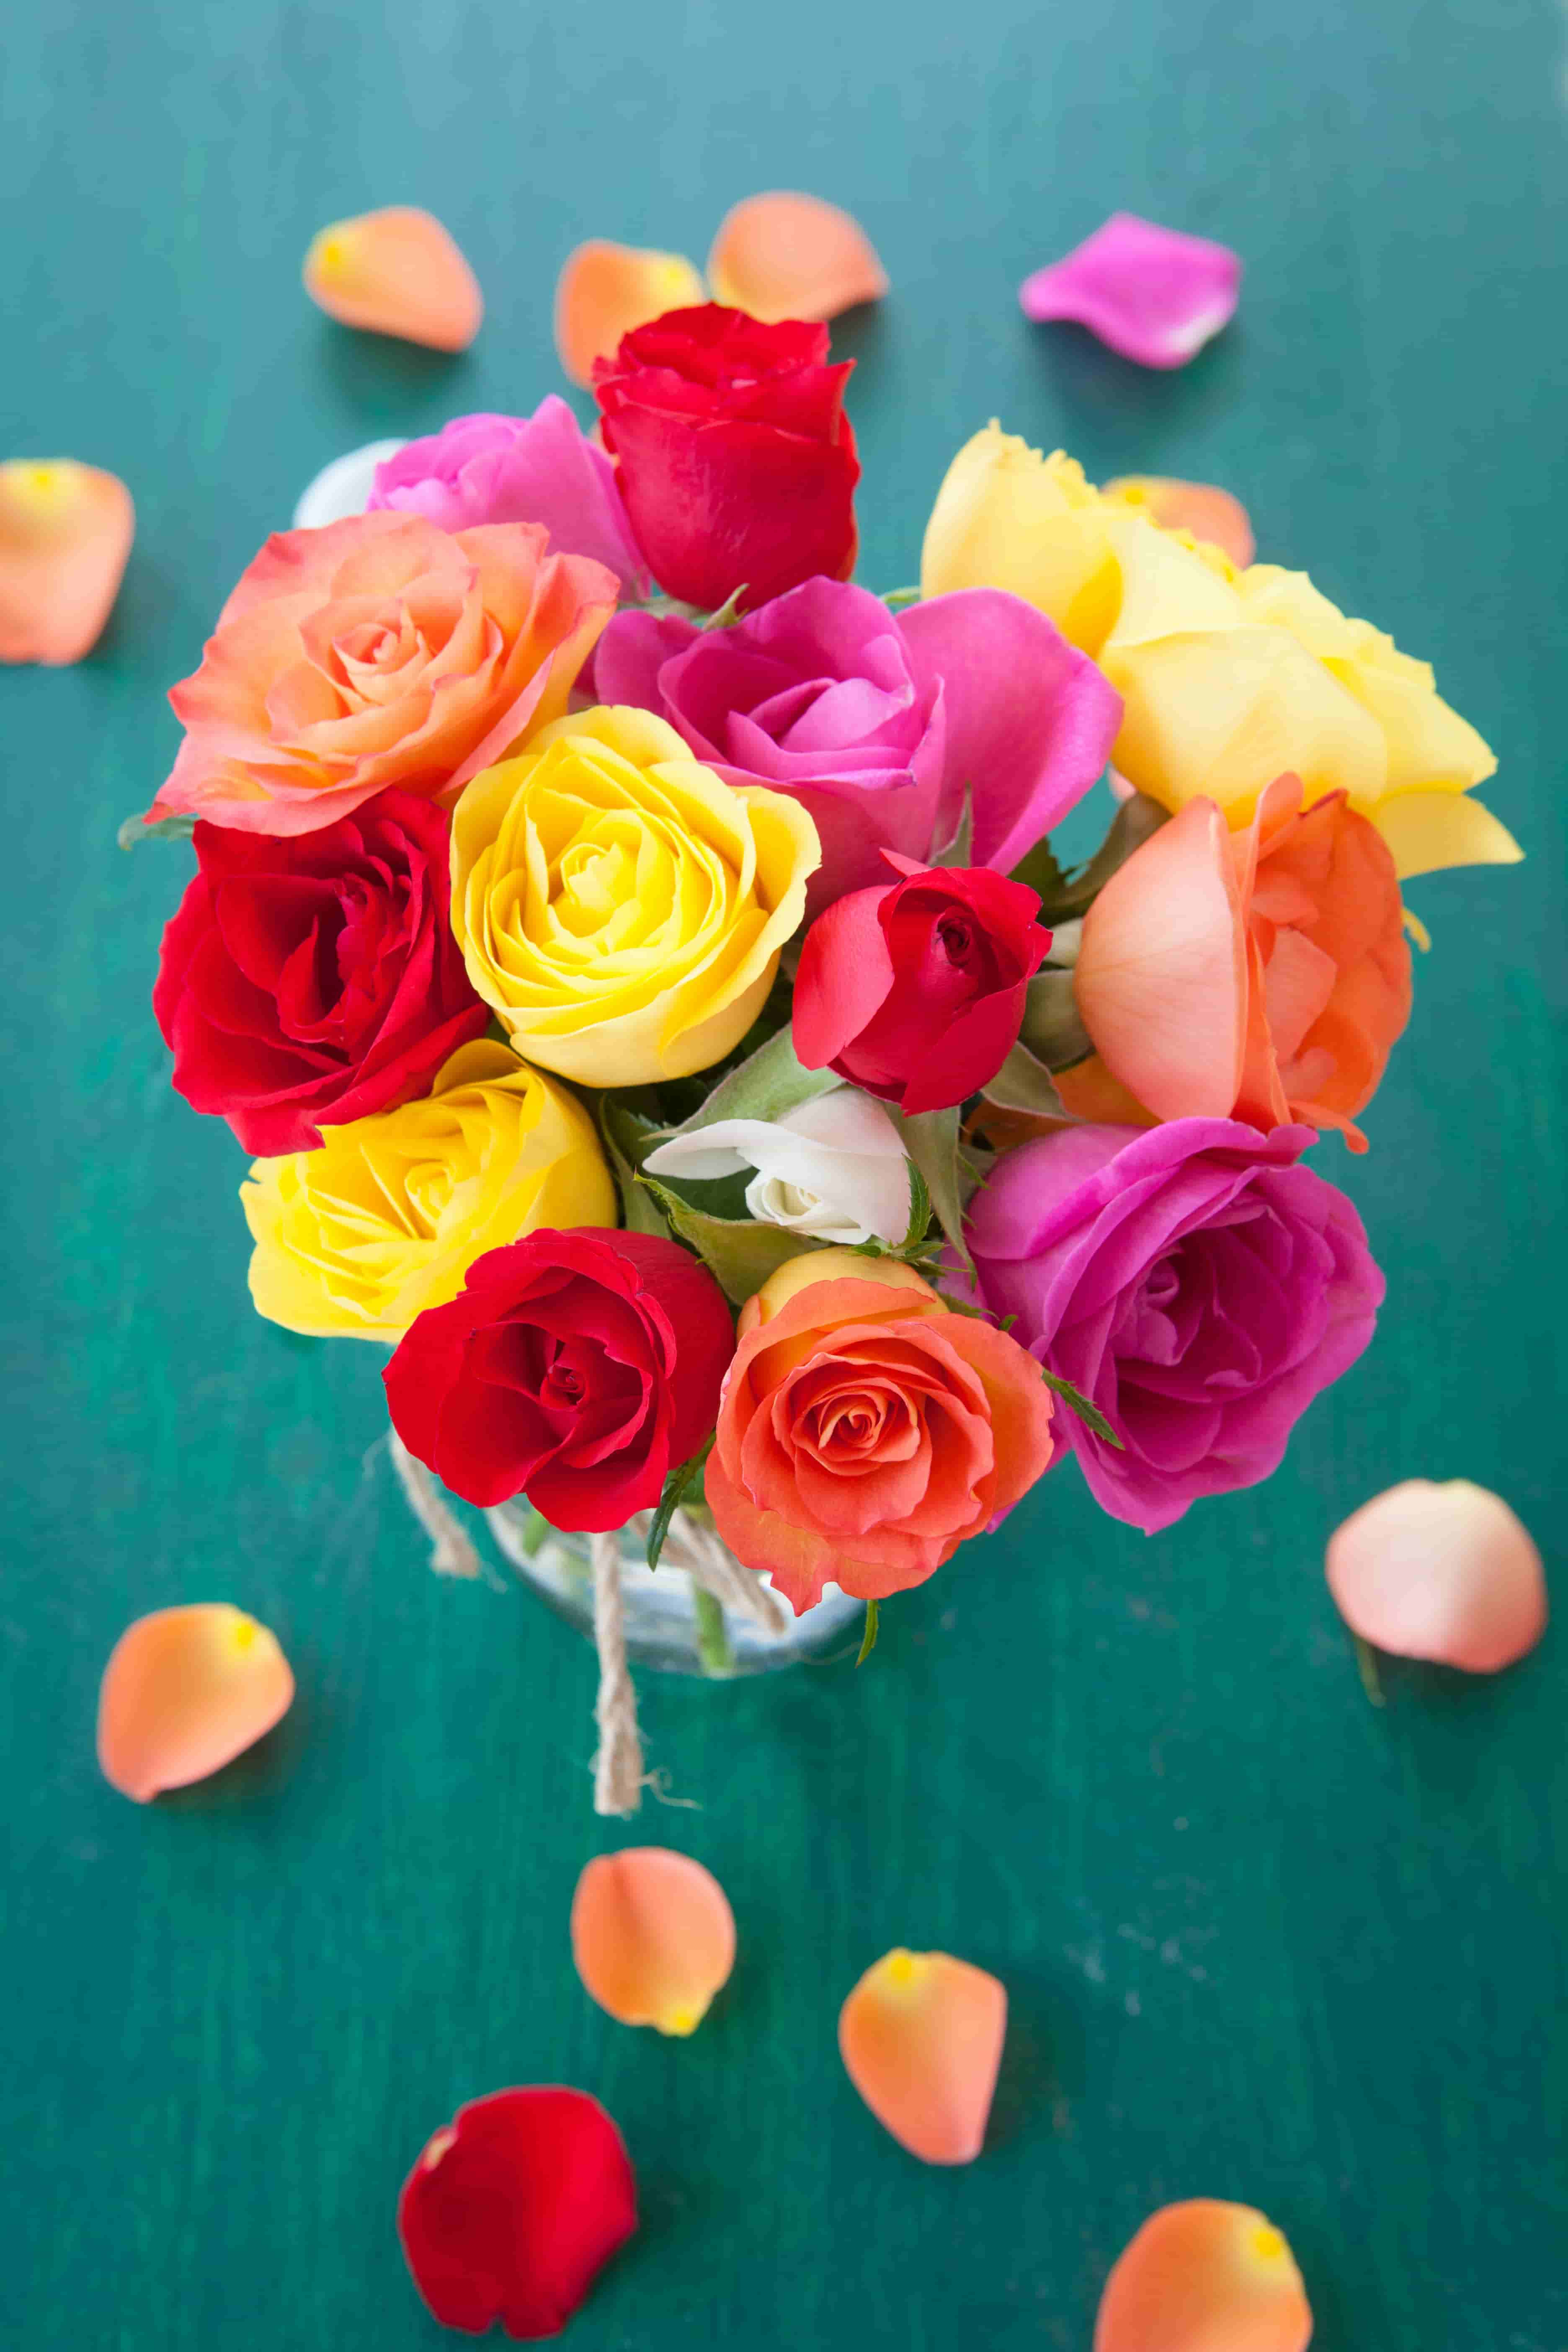 colorful roses Images in HD for free downlaod